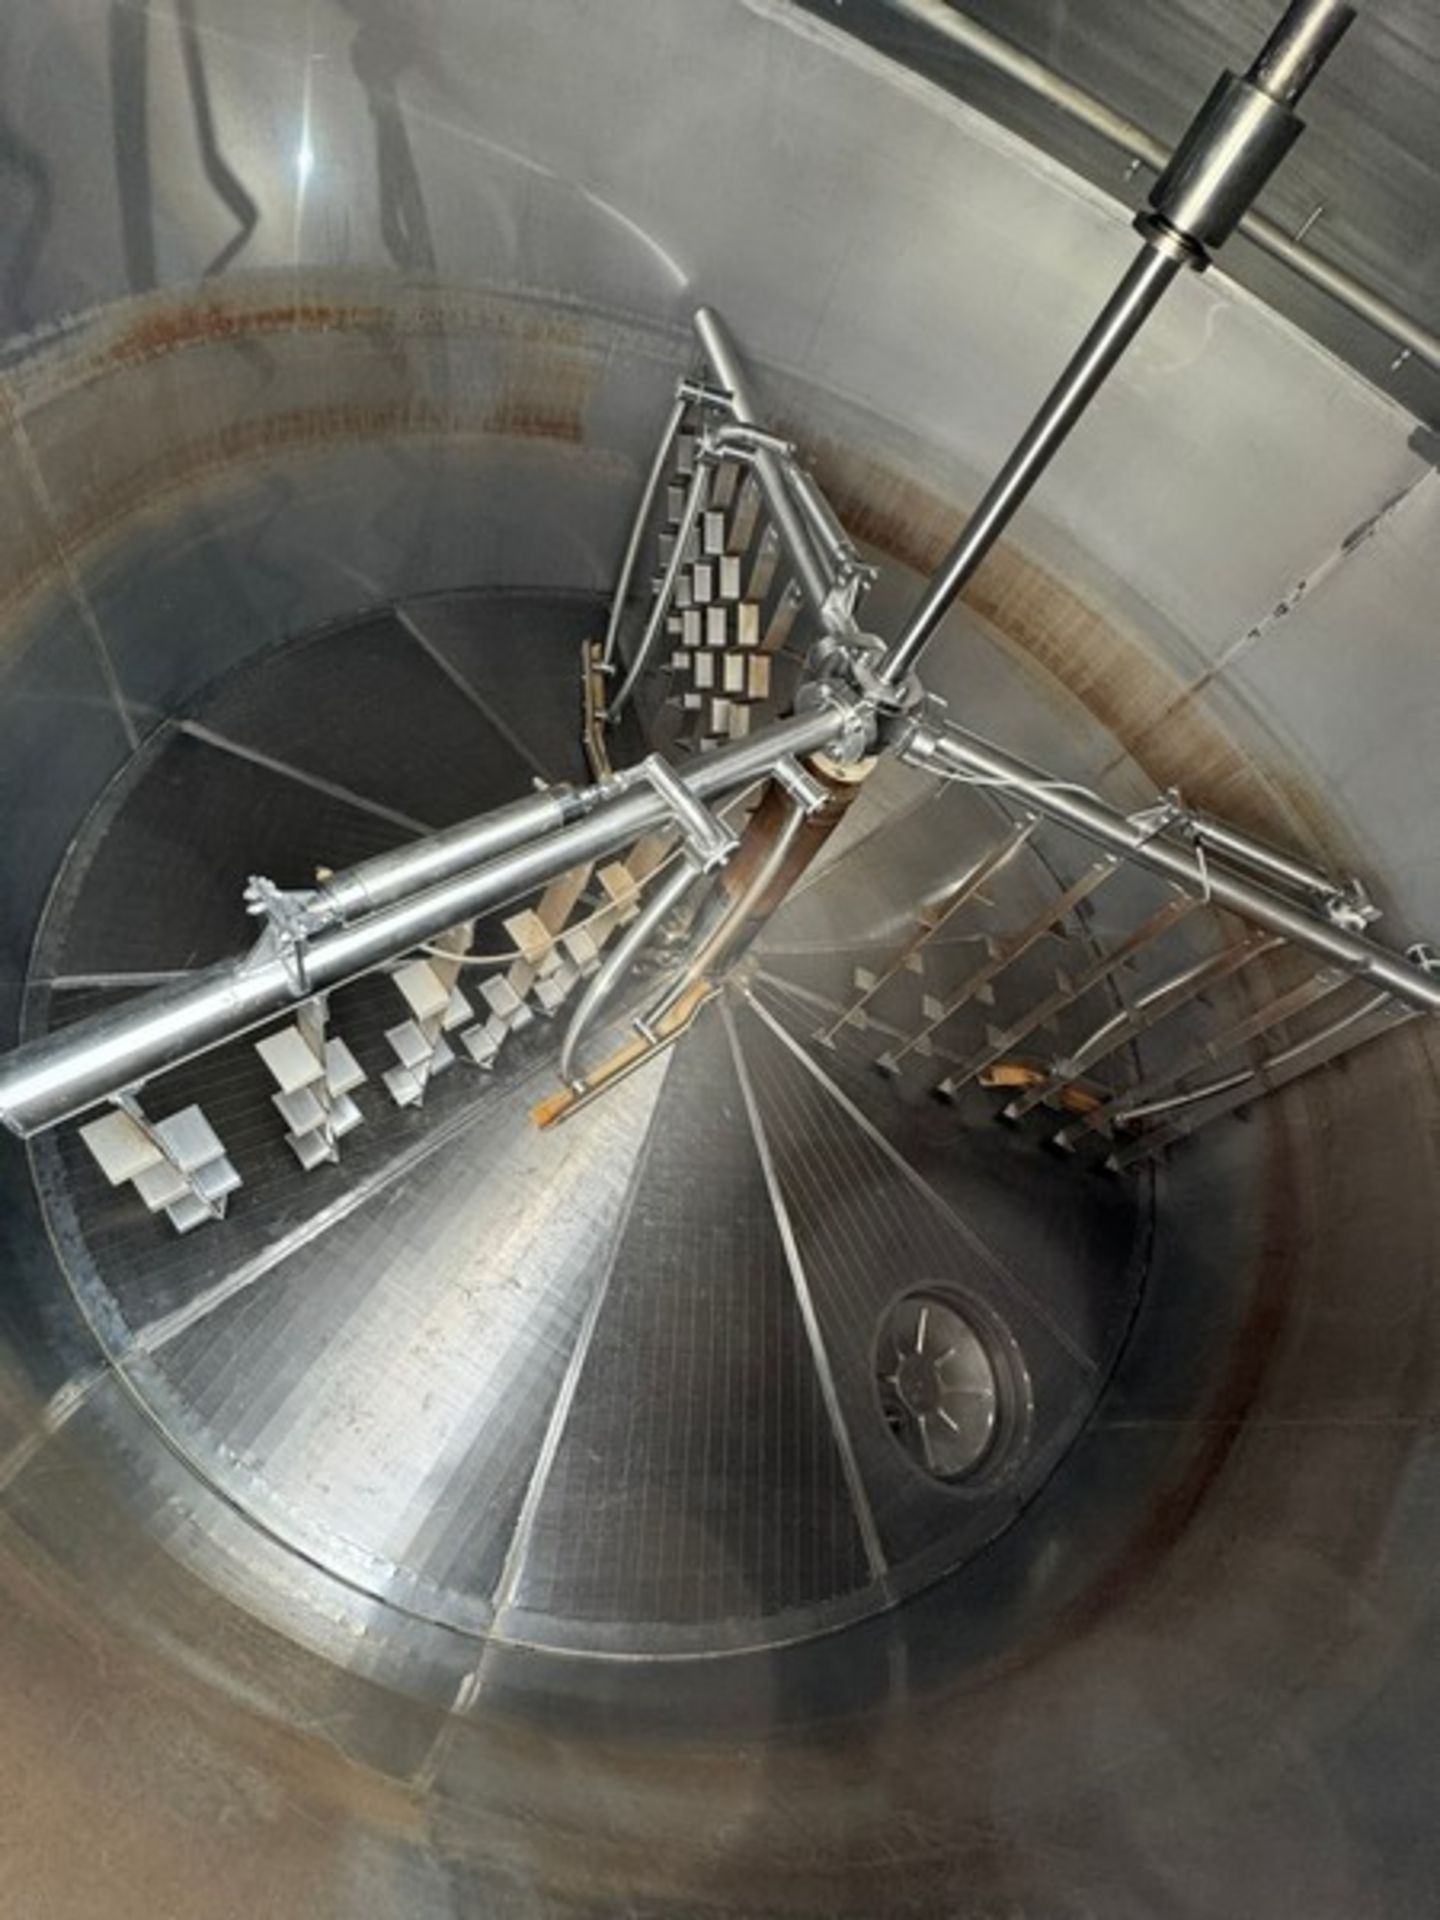 2012 Specific Mechanical Systems 45 BBL Capacity S/S Lauter Tun Tank, S/N RMP-136-12, with Legs, - Image 15 of 16